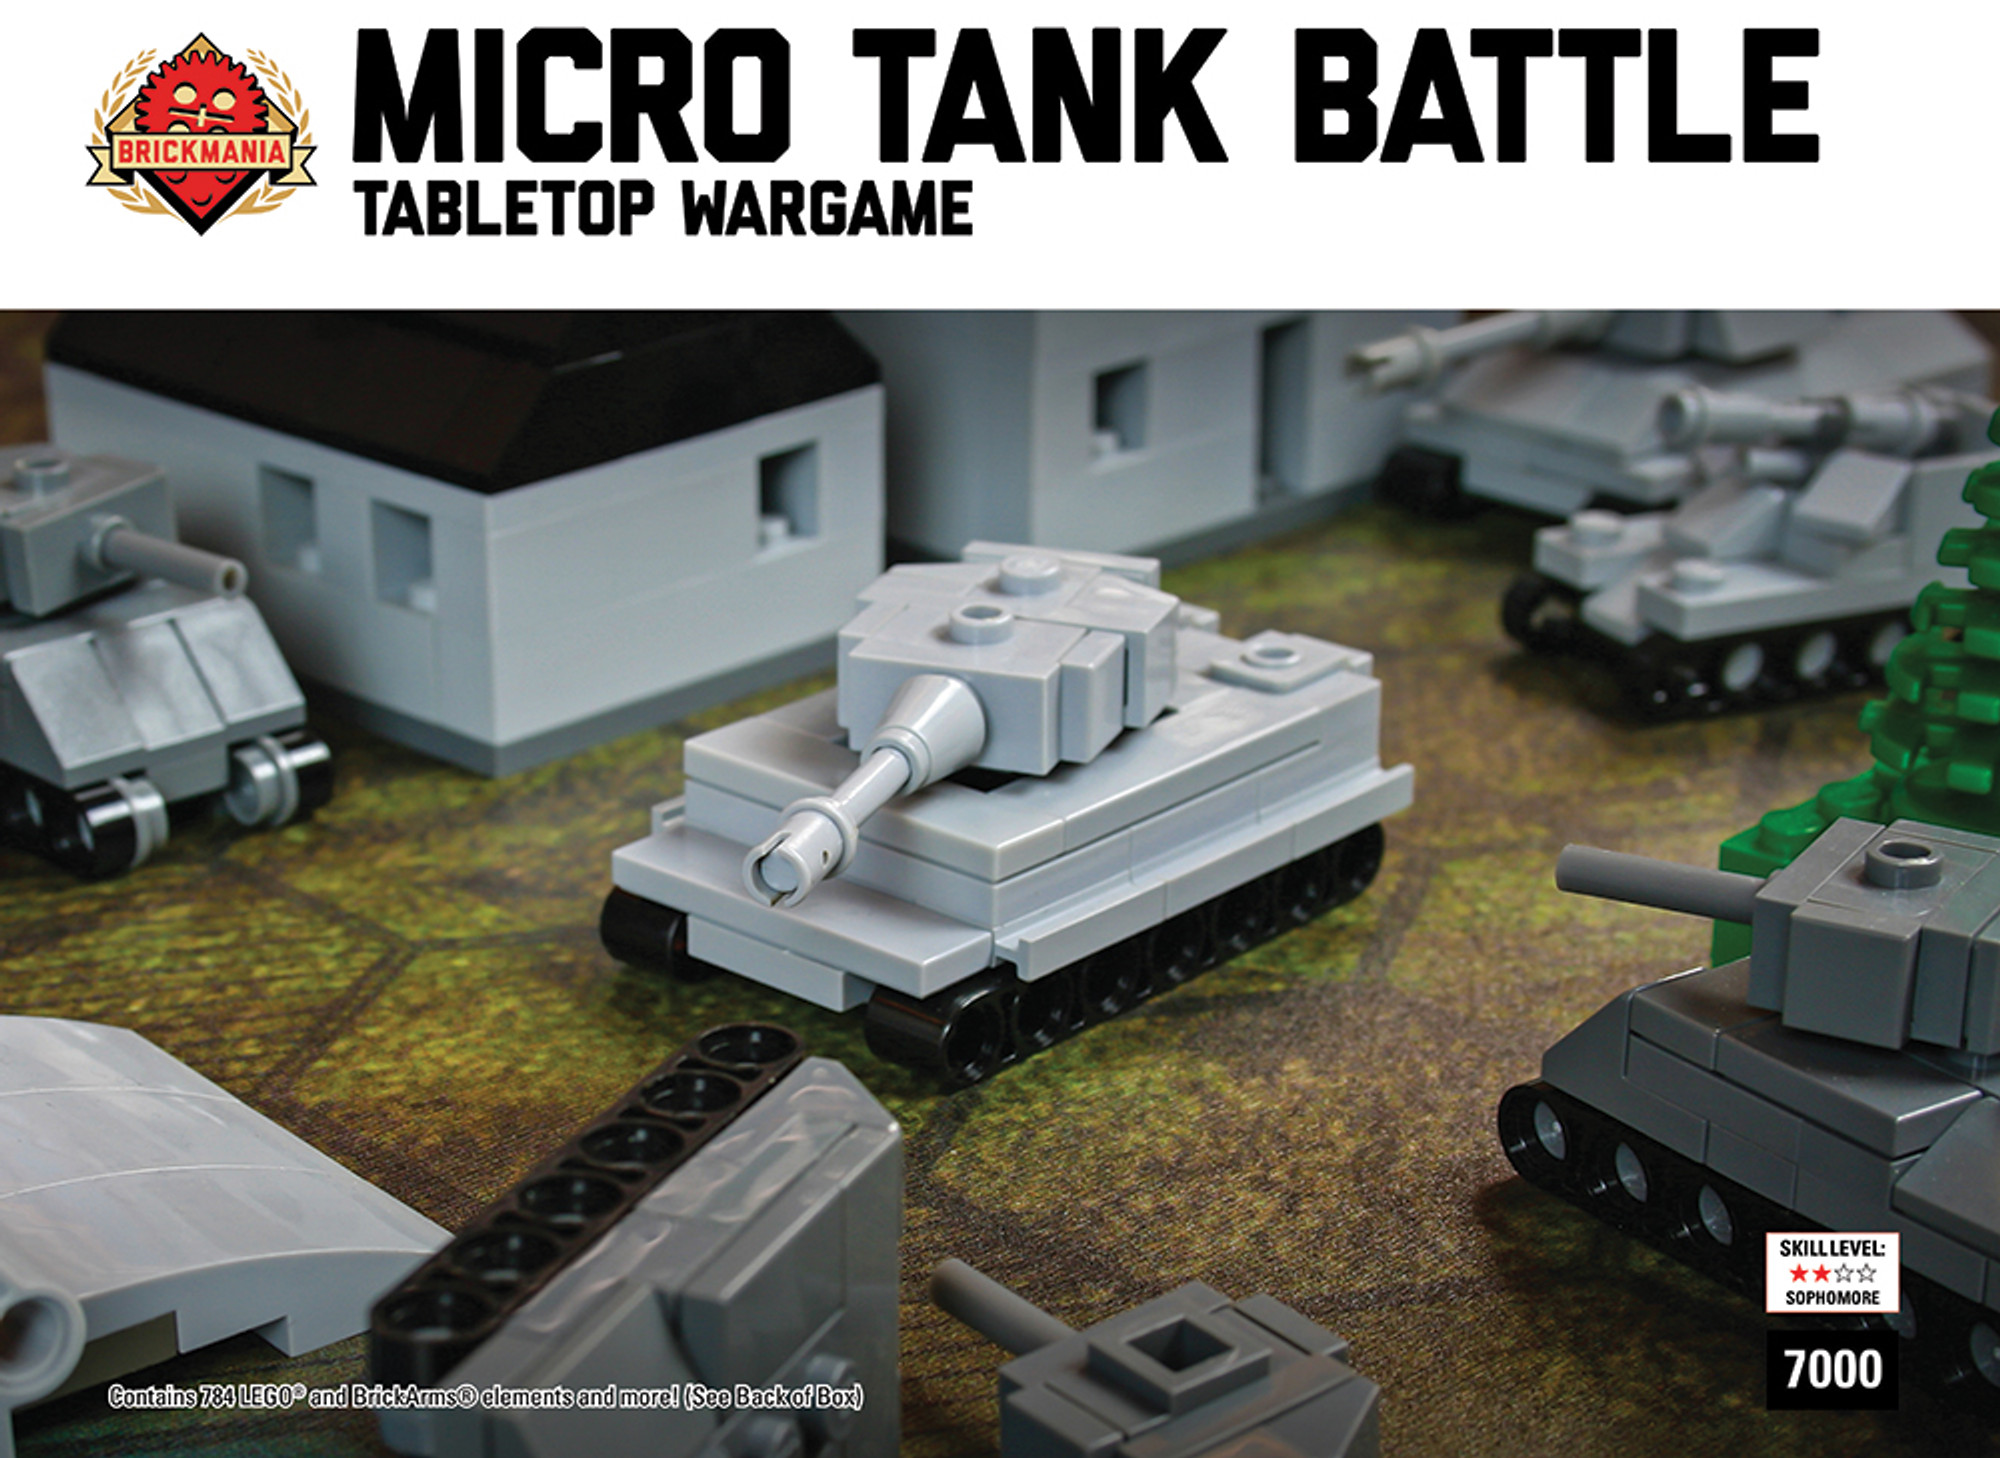 Brickmania - Add our official M3 Grant Micro-tank to your arsenal for our  Micro Brick Battle tabletop game. This kit includes the parts and  instructions to build the game piece, as well